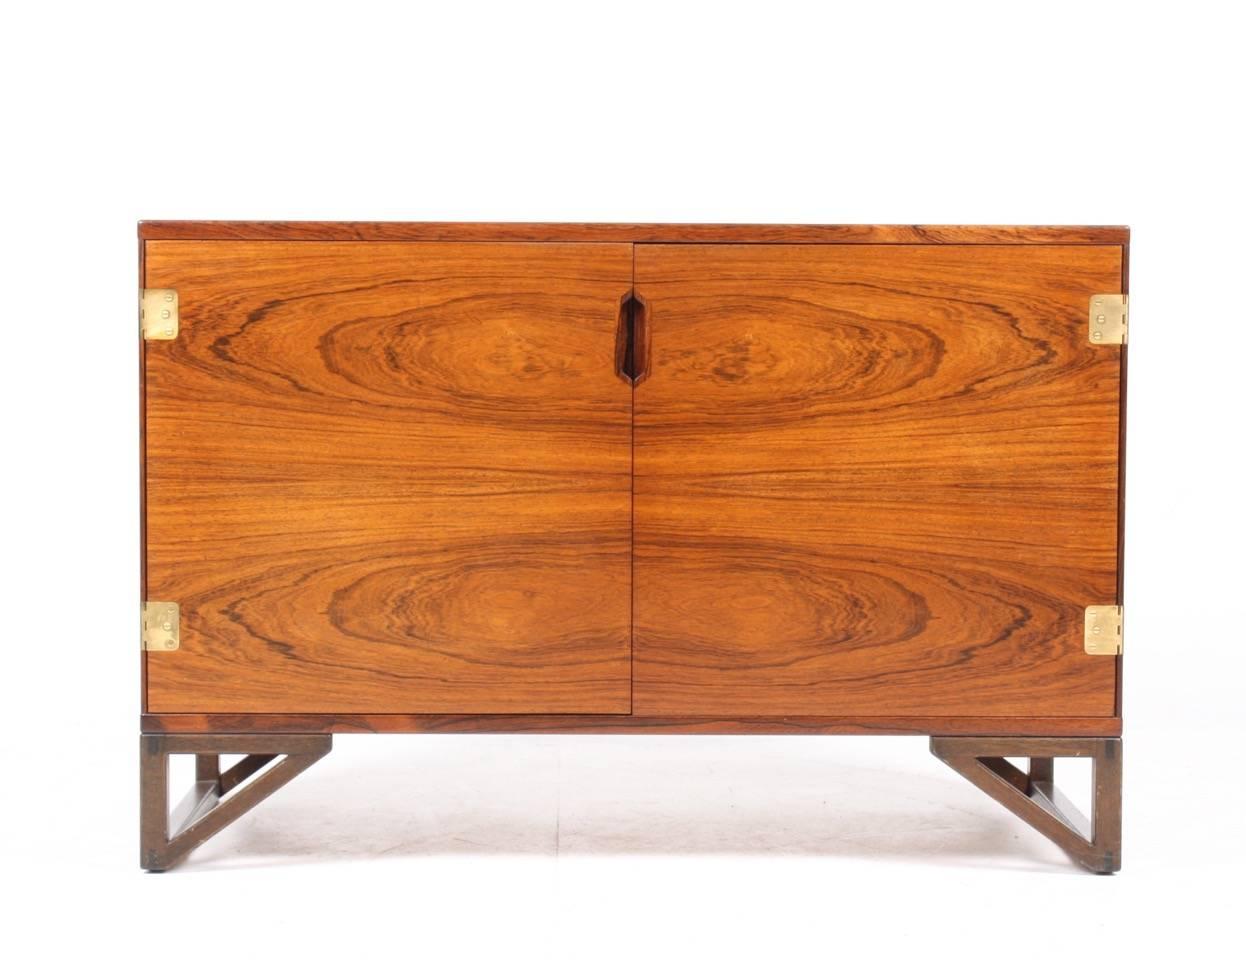 Elegant cabinet in rosewood with brass hardware. Designed by Svend Langkilde M.A.A. Made in Denmark, circa 1965. Great original condition.